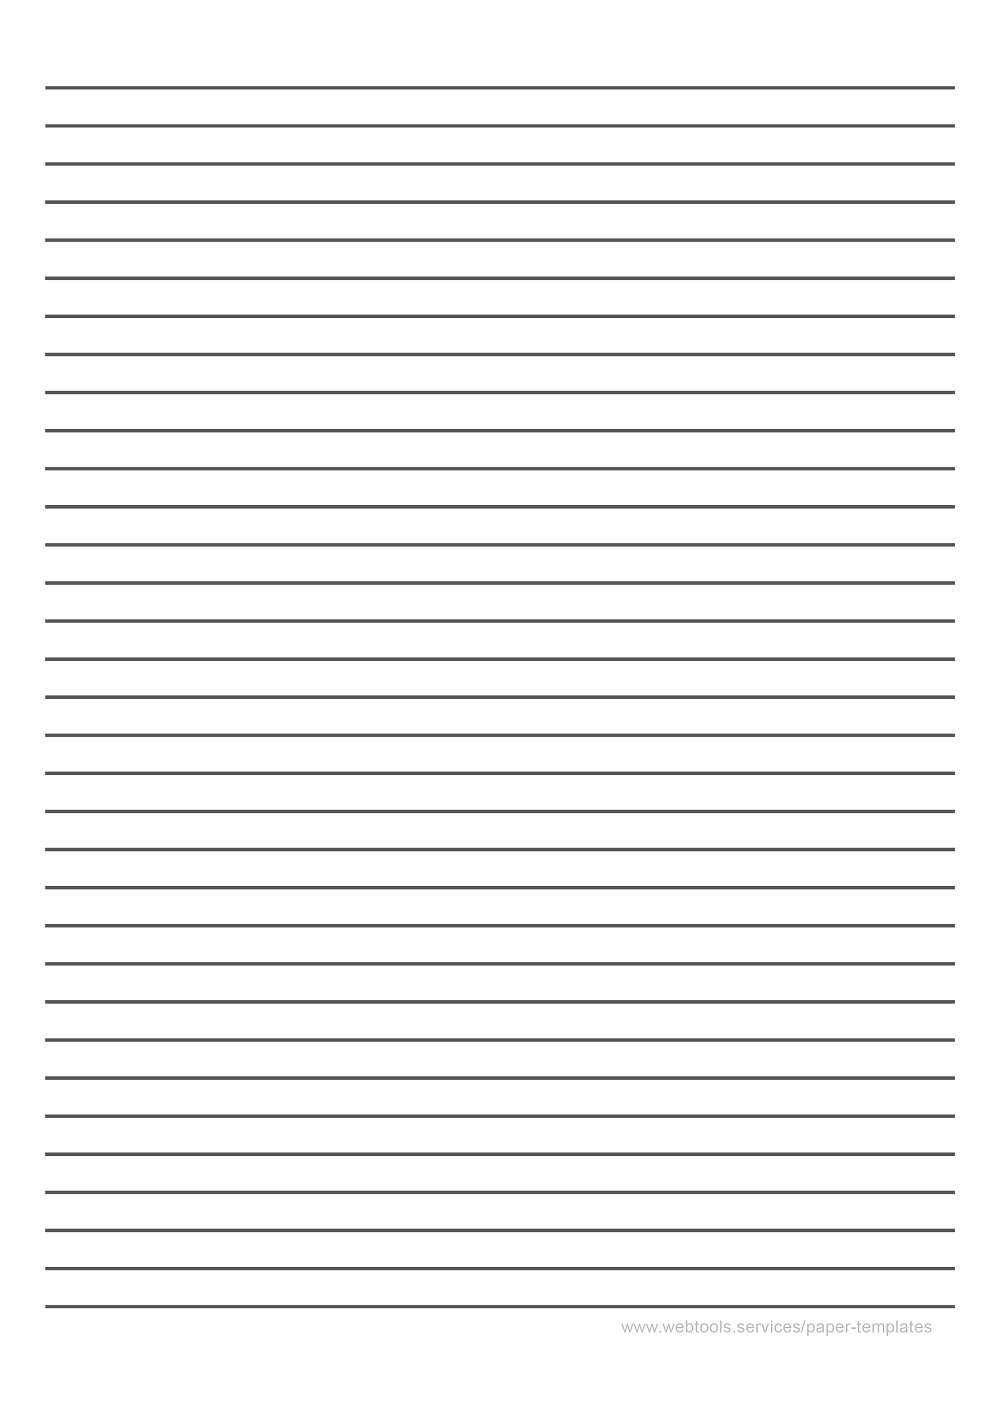 Black Lined Paper Template With 8 mm Line Height